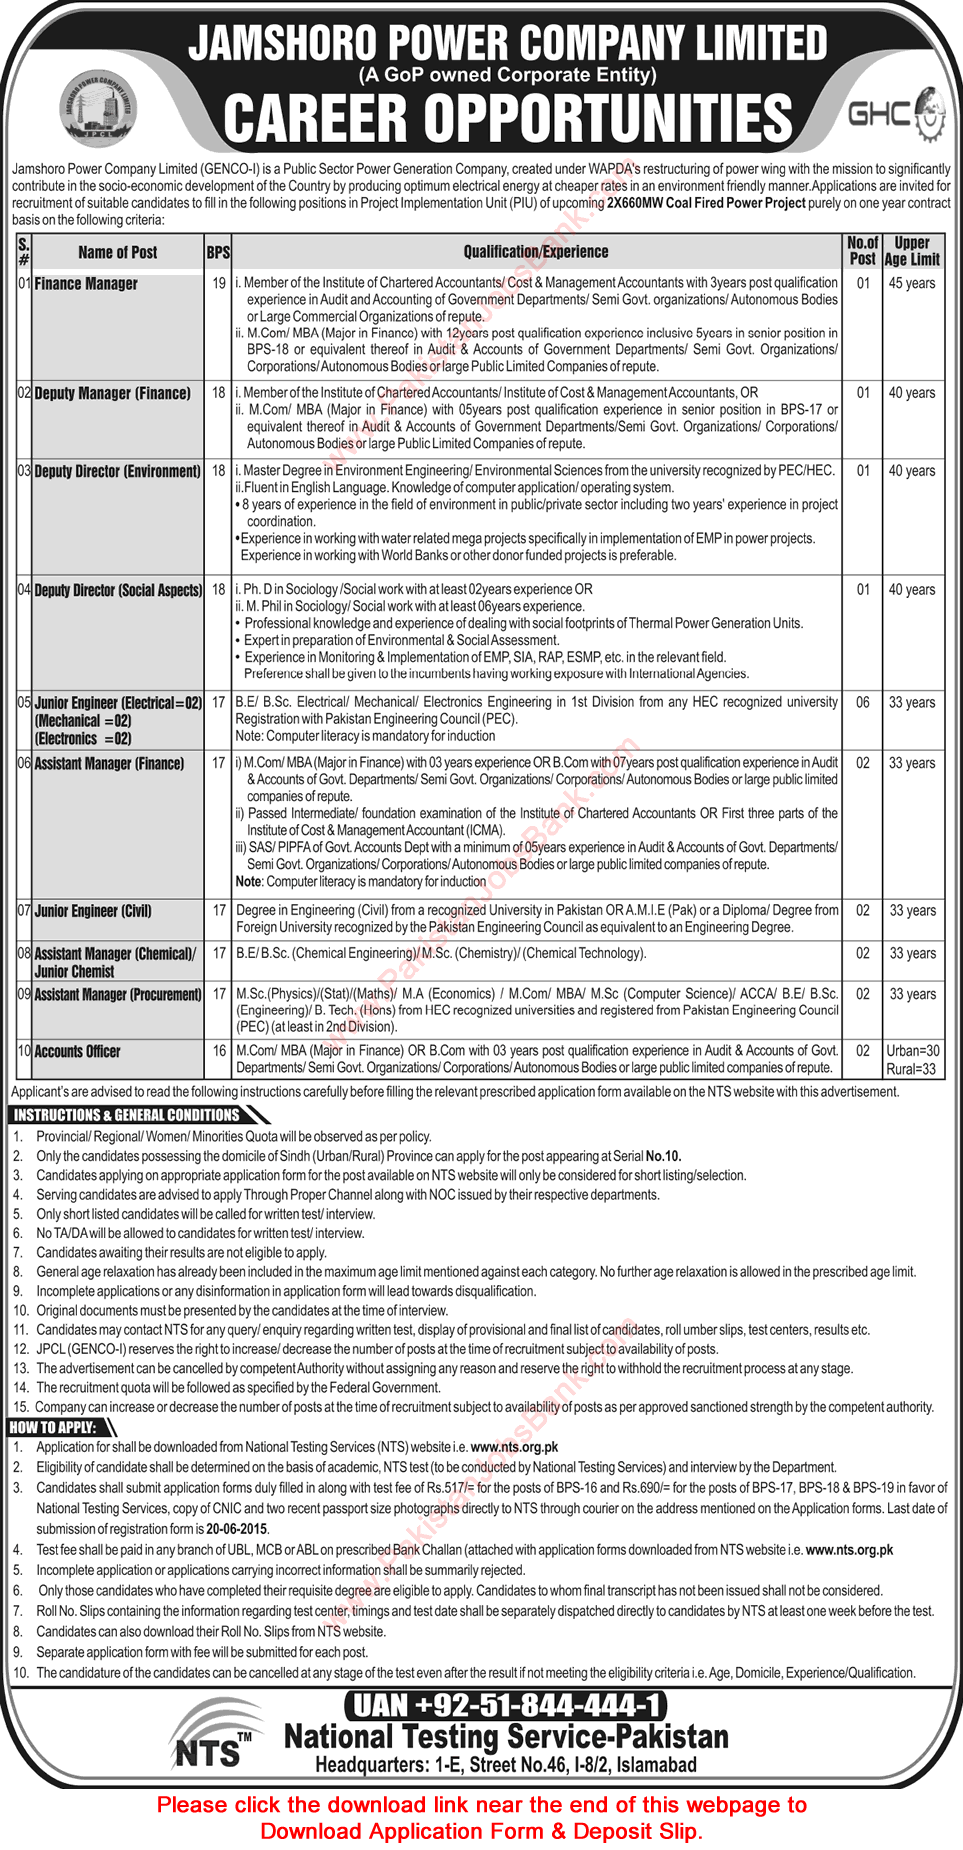 Careers in Jamshoro Power Company Limited GENCO-1 2015 May NTS Application Form Download